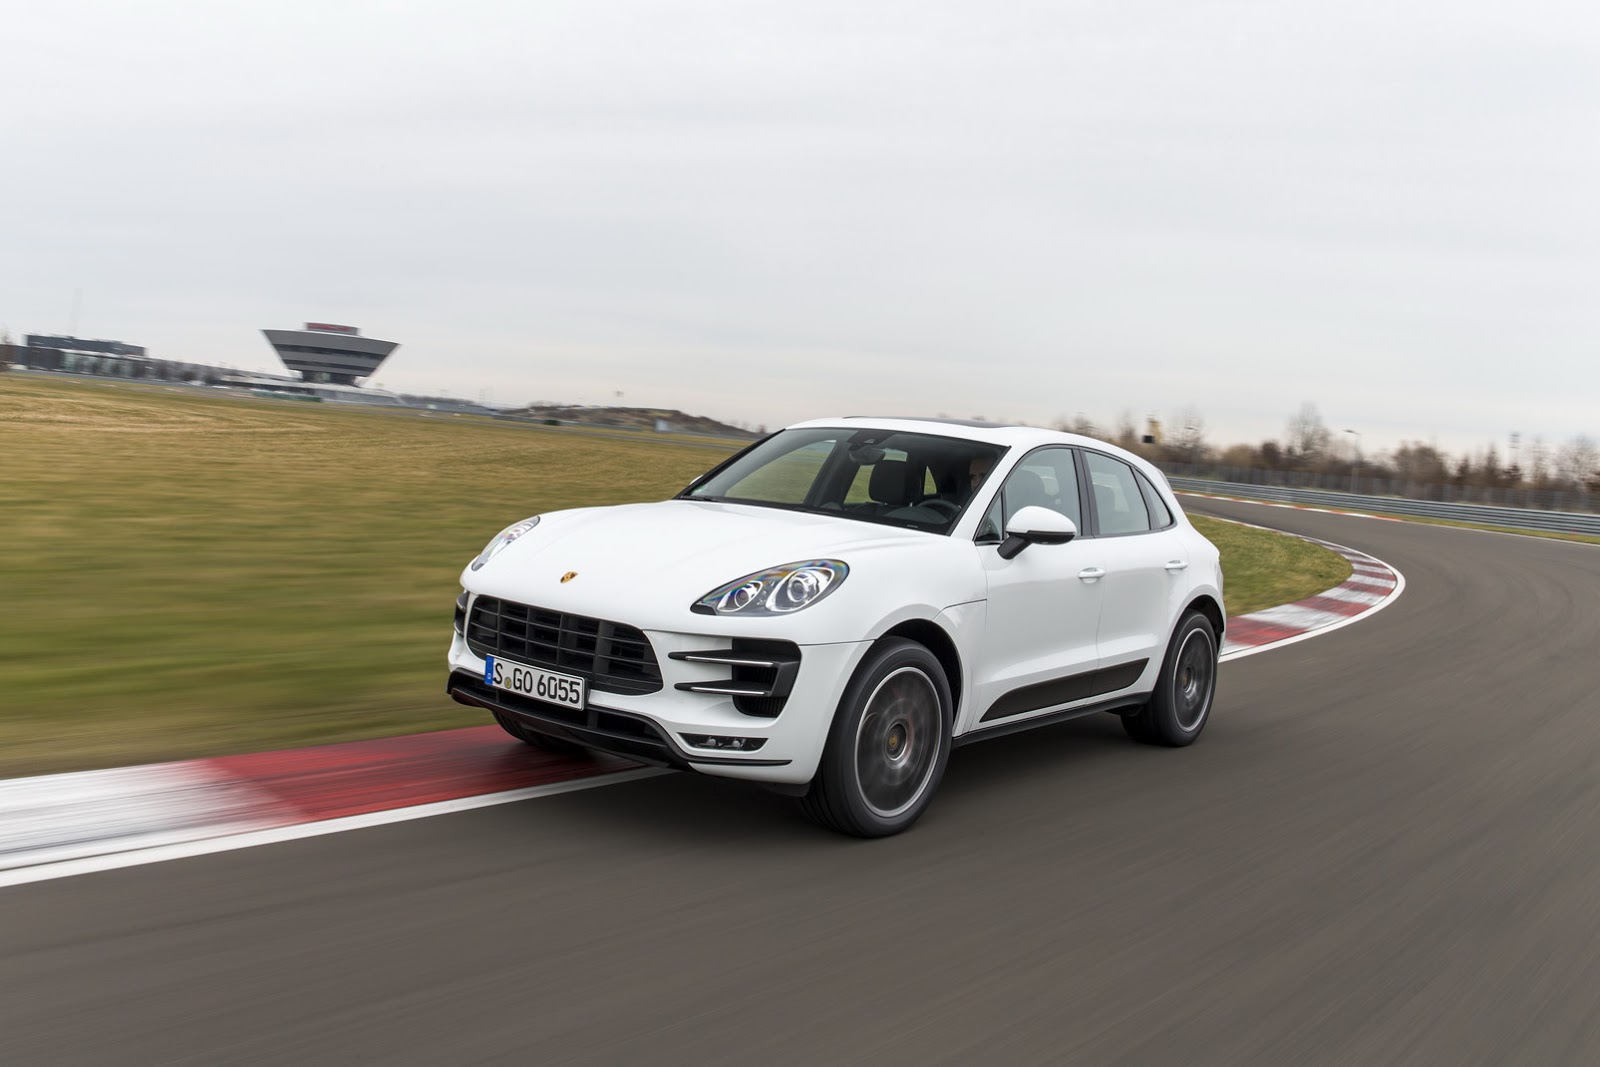 Porsche Issues Precautionary Worldwide Recall Of Macan S And Turbo